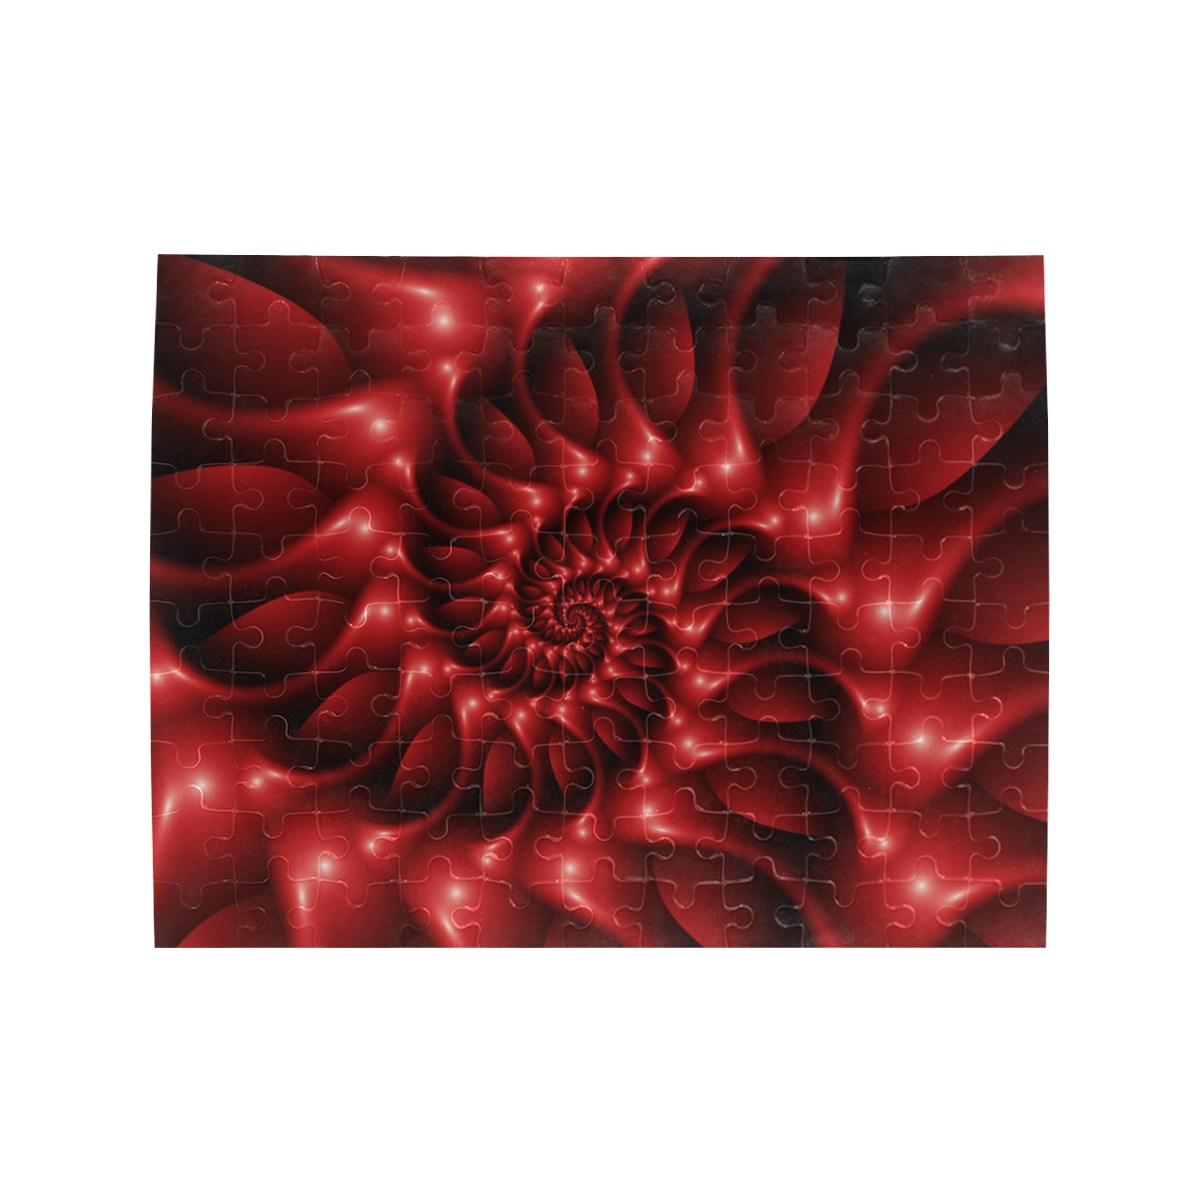 Red Spiral Fractal Puzzle Rectangle Jigsaw Puzzle (Set of 110 Pieces)